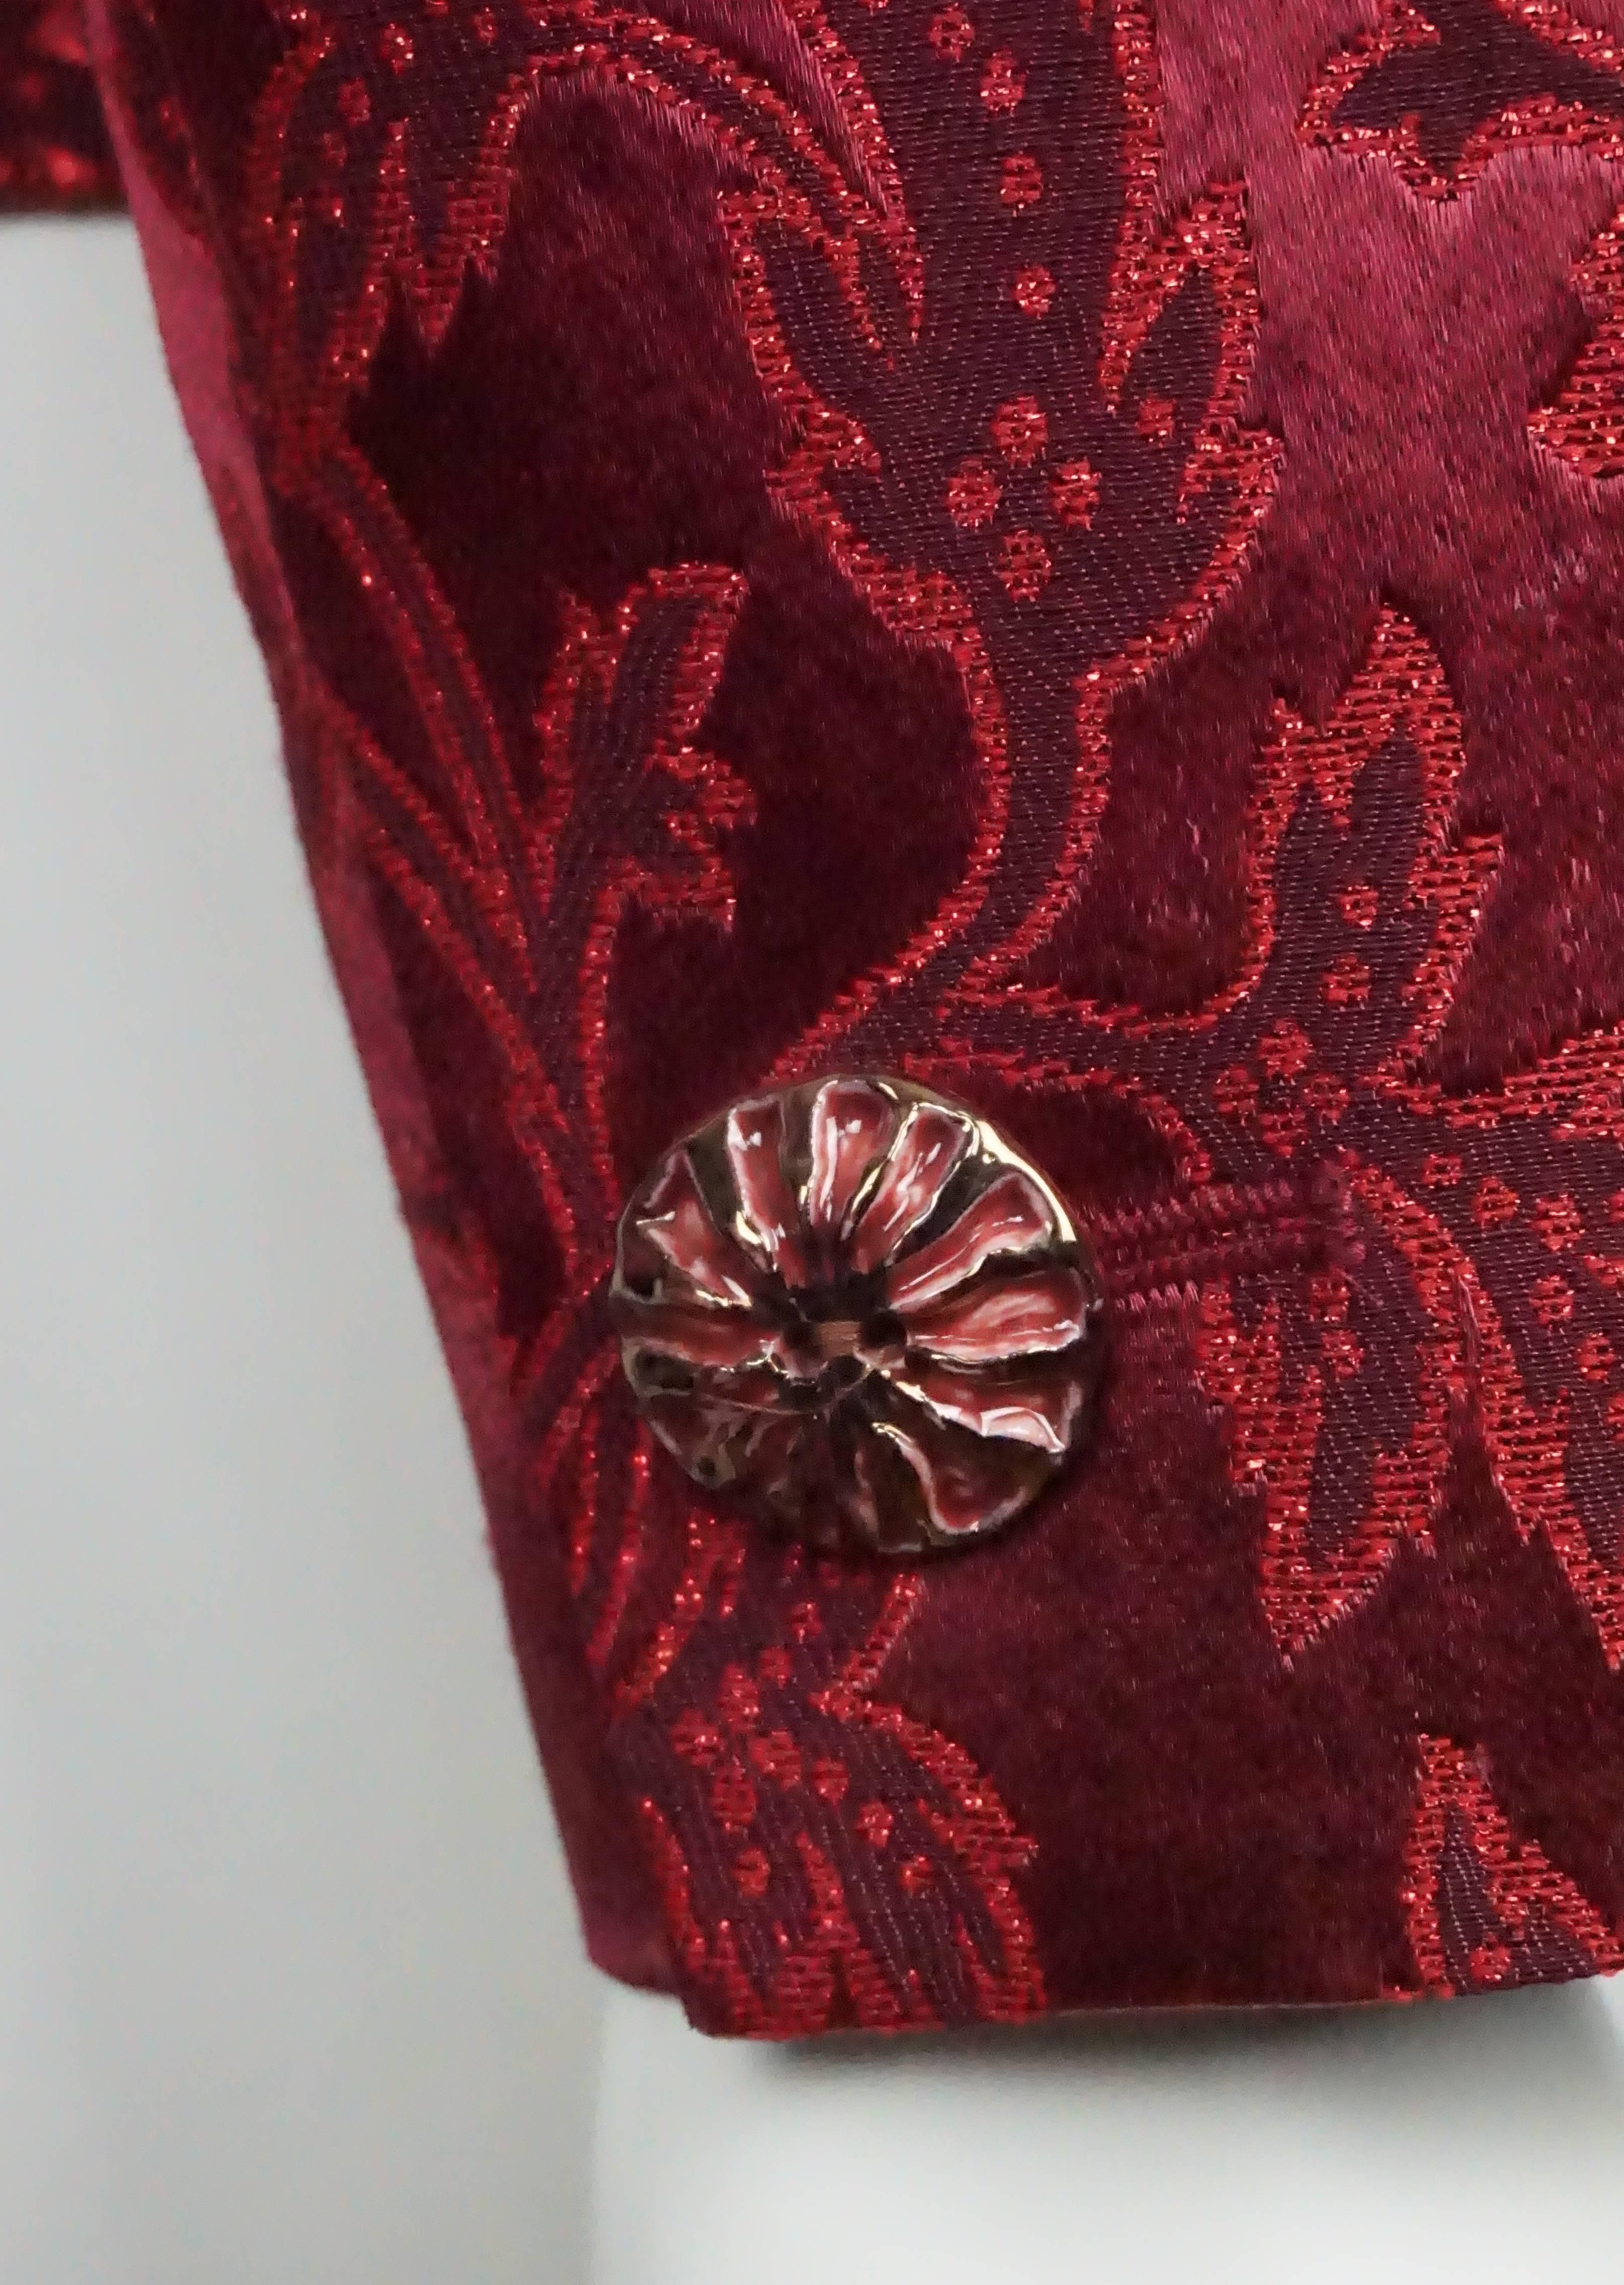 Yves Saint Laurent Red Brocade Jacket with Enamel Buttons  In Excellent Condition For Sale In West Palm Beach, FL